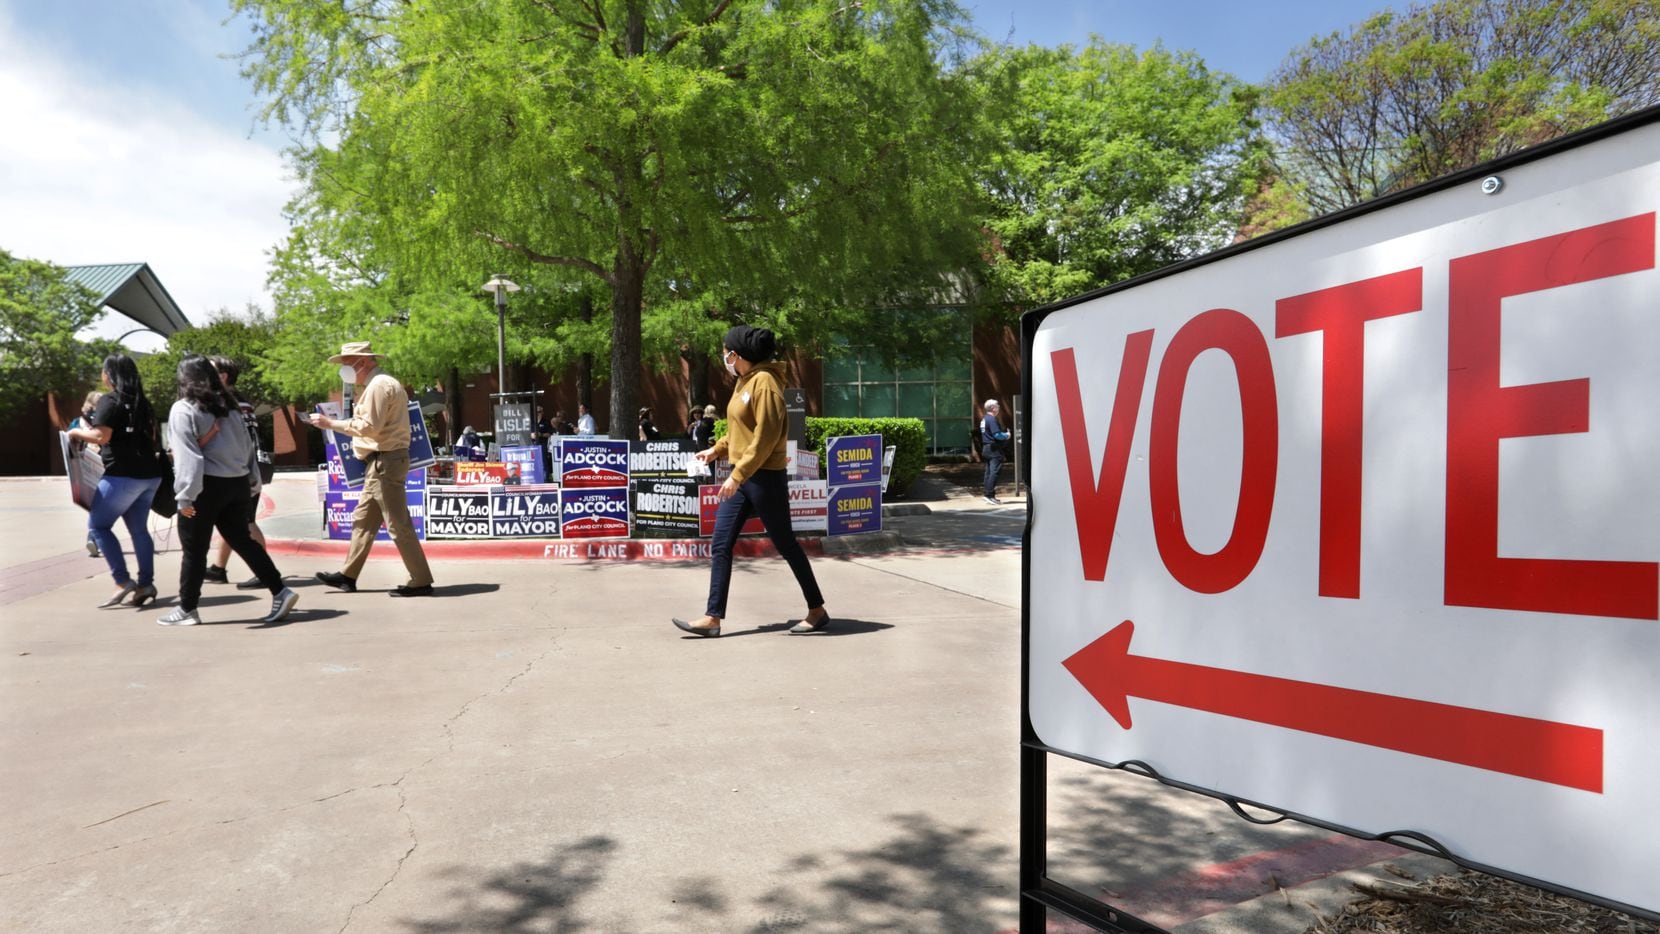 Residents across North Texas are able to participate in early voting for city and school races through April 27. Election Day is May 1.